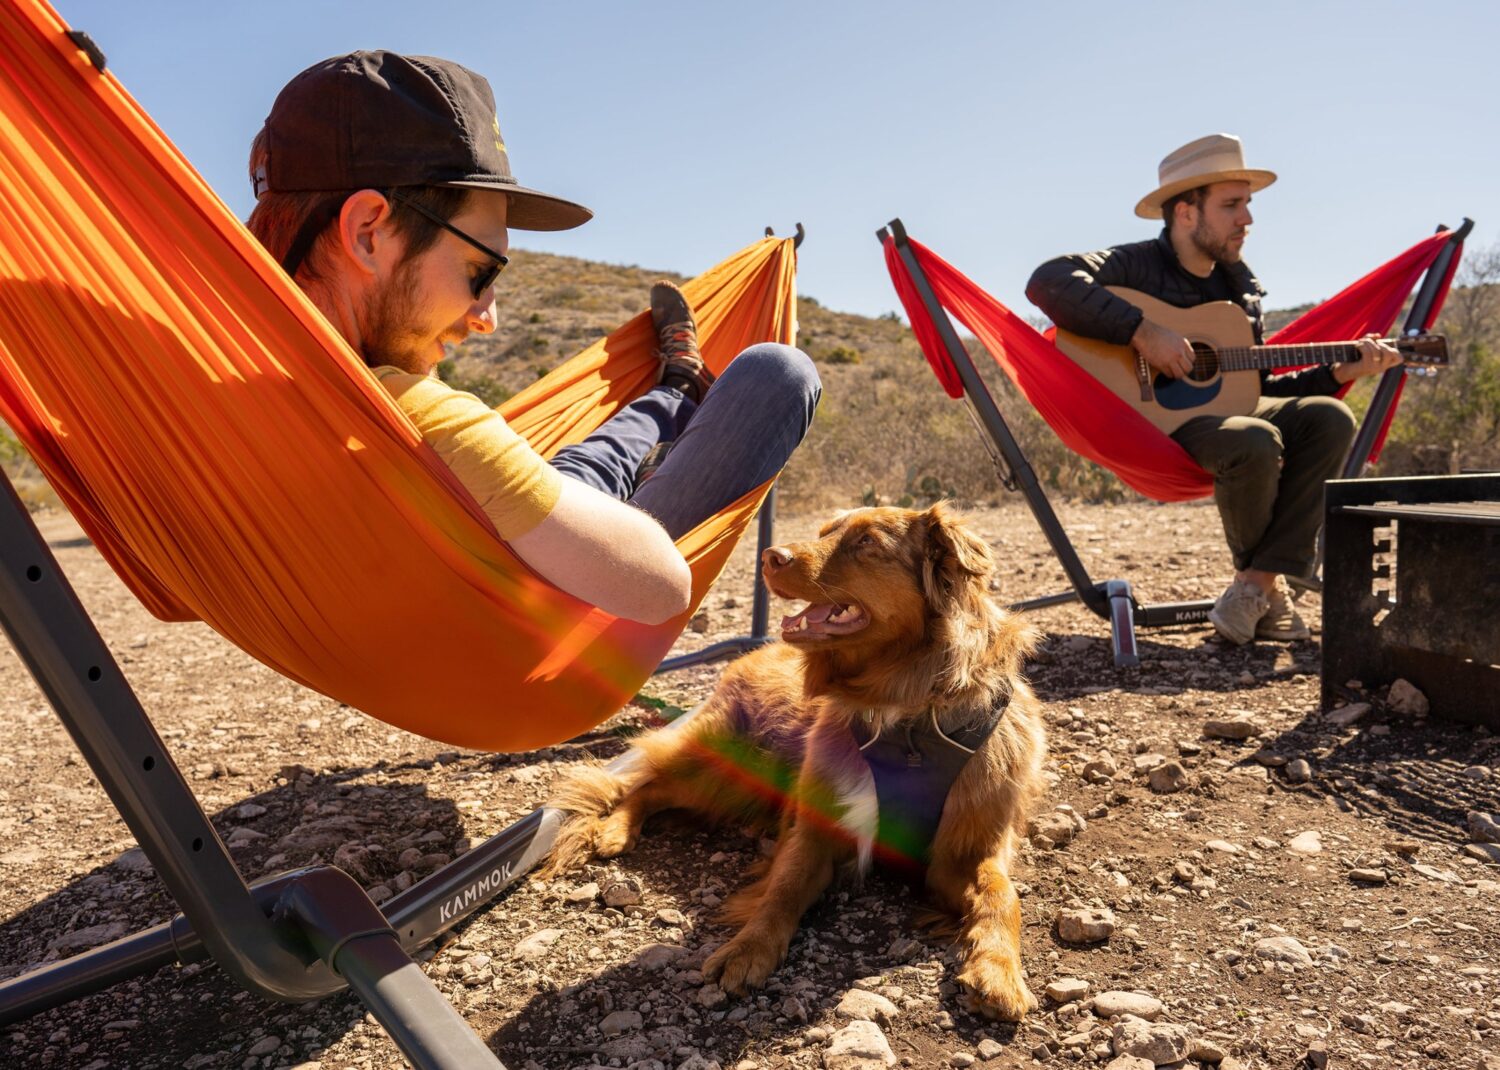 Find the perfect camping hammock with stand to help you relax and enjoy the outdoors!